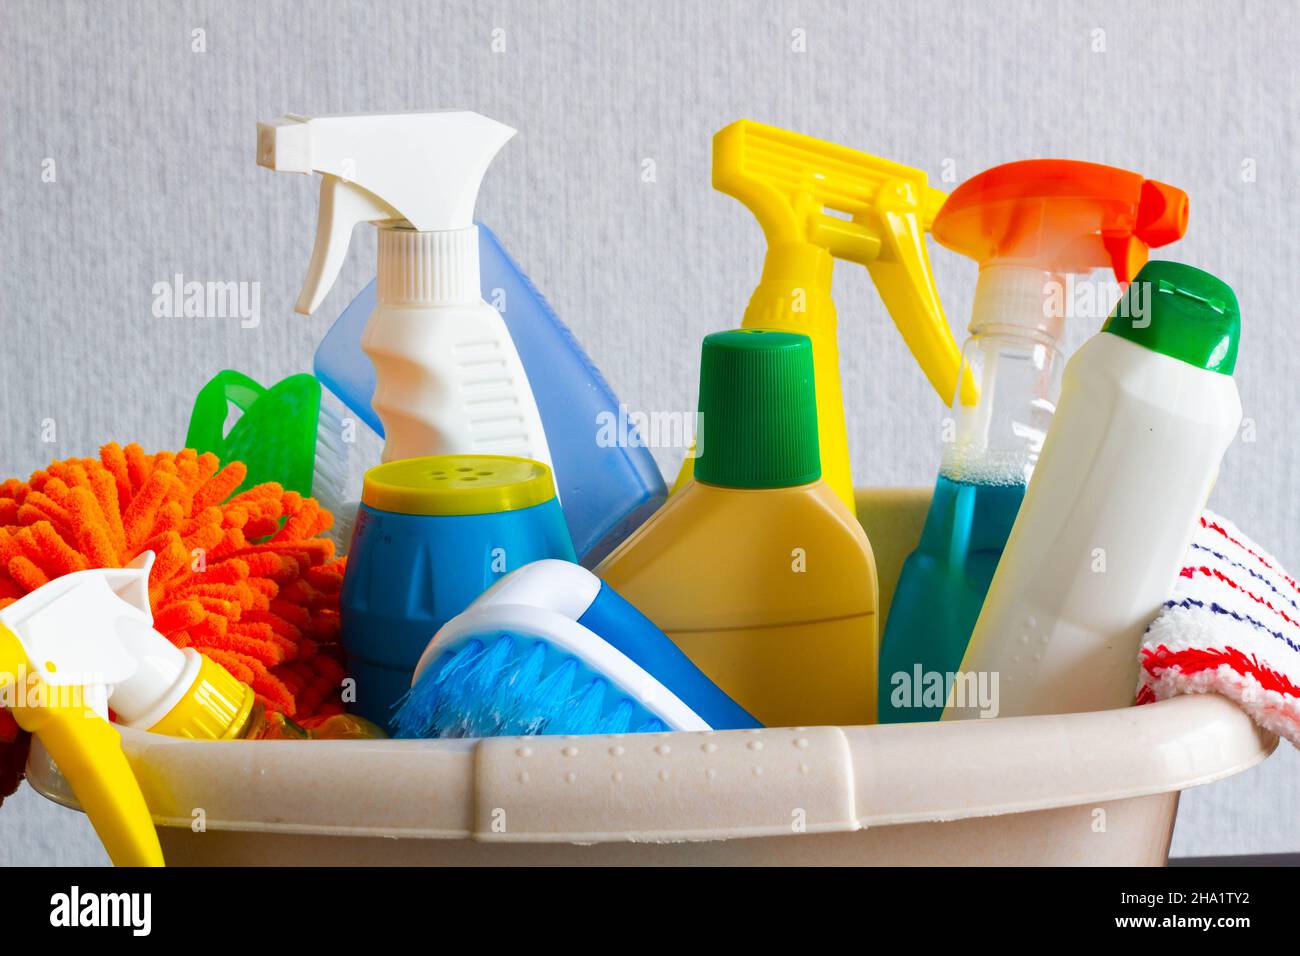 Basket with detergents on the table. Harmless dishwashing detergent. Detergent for washing floors. Household cleaning chemicals. Chemical substances. Stock Photo